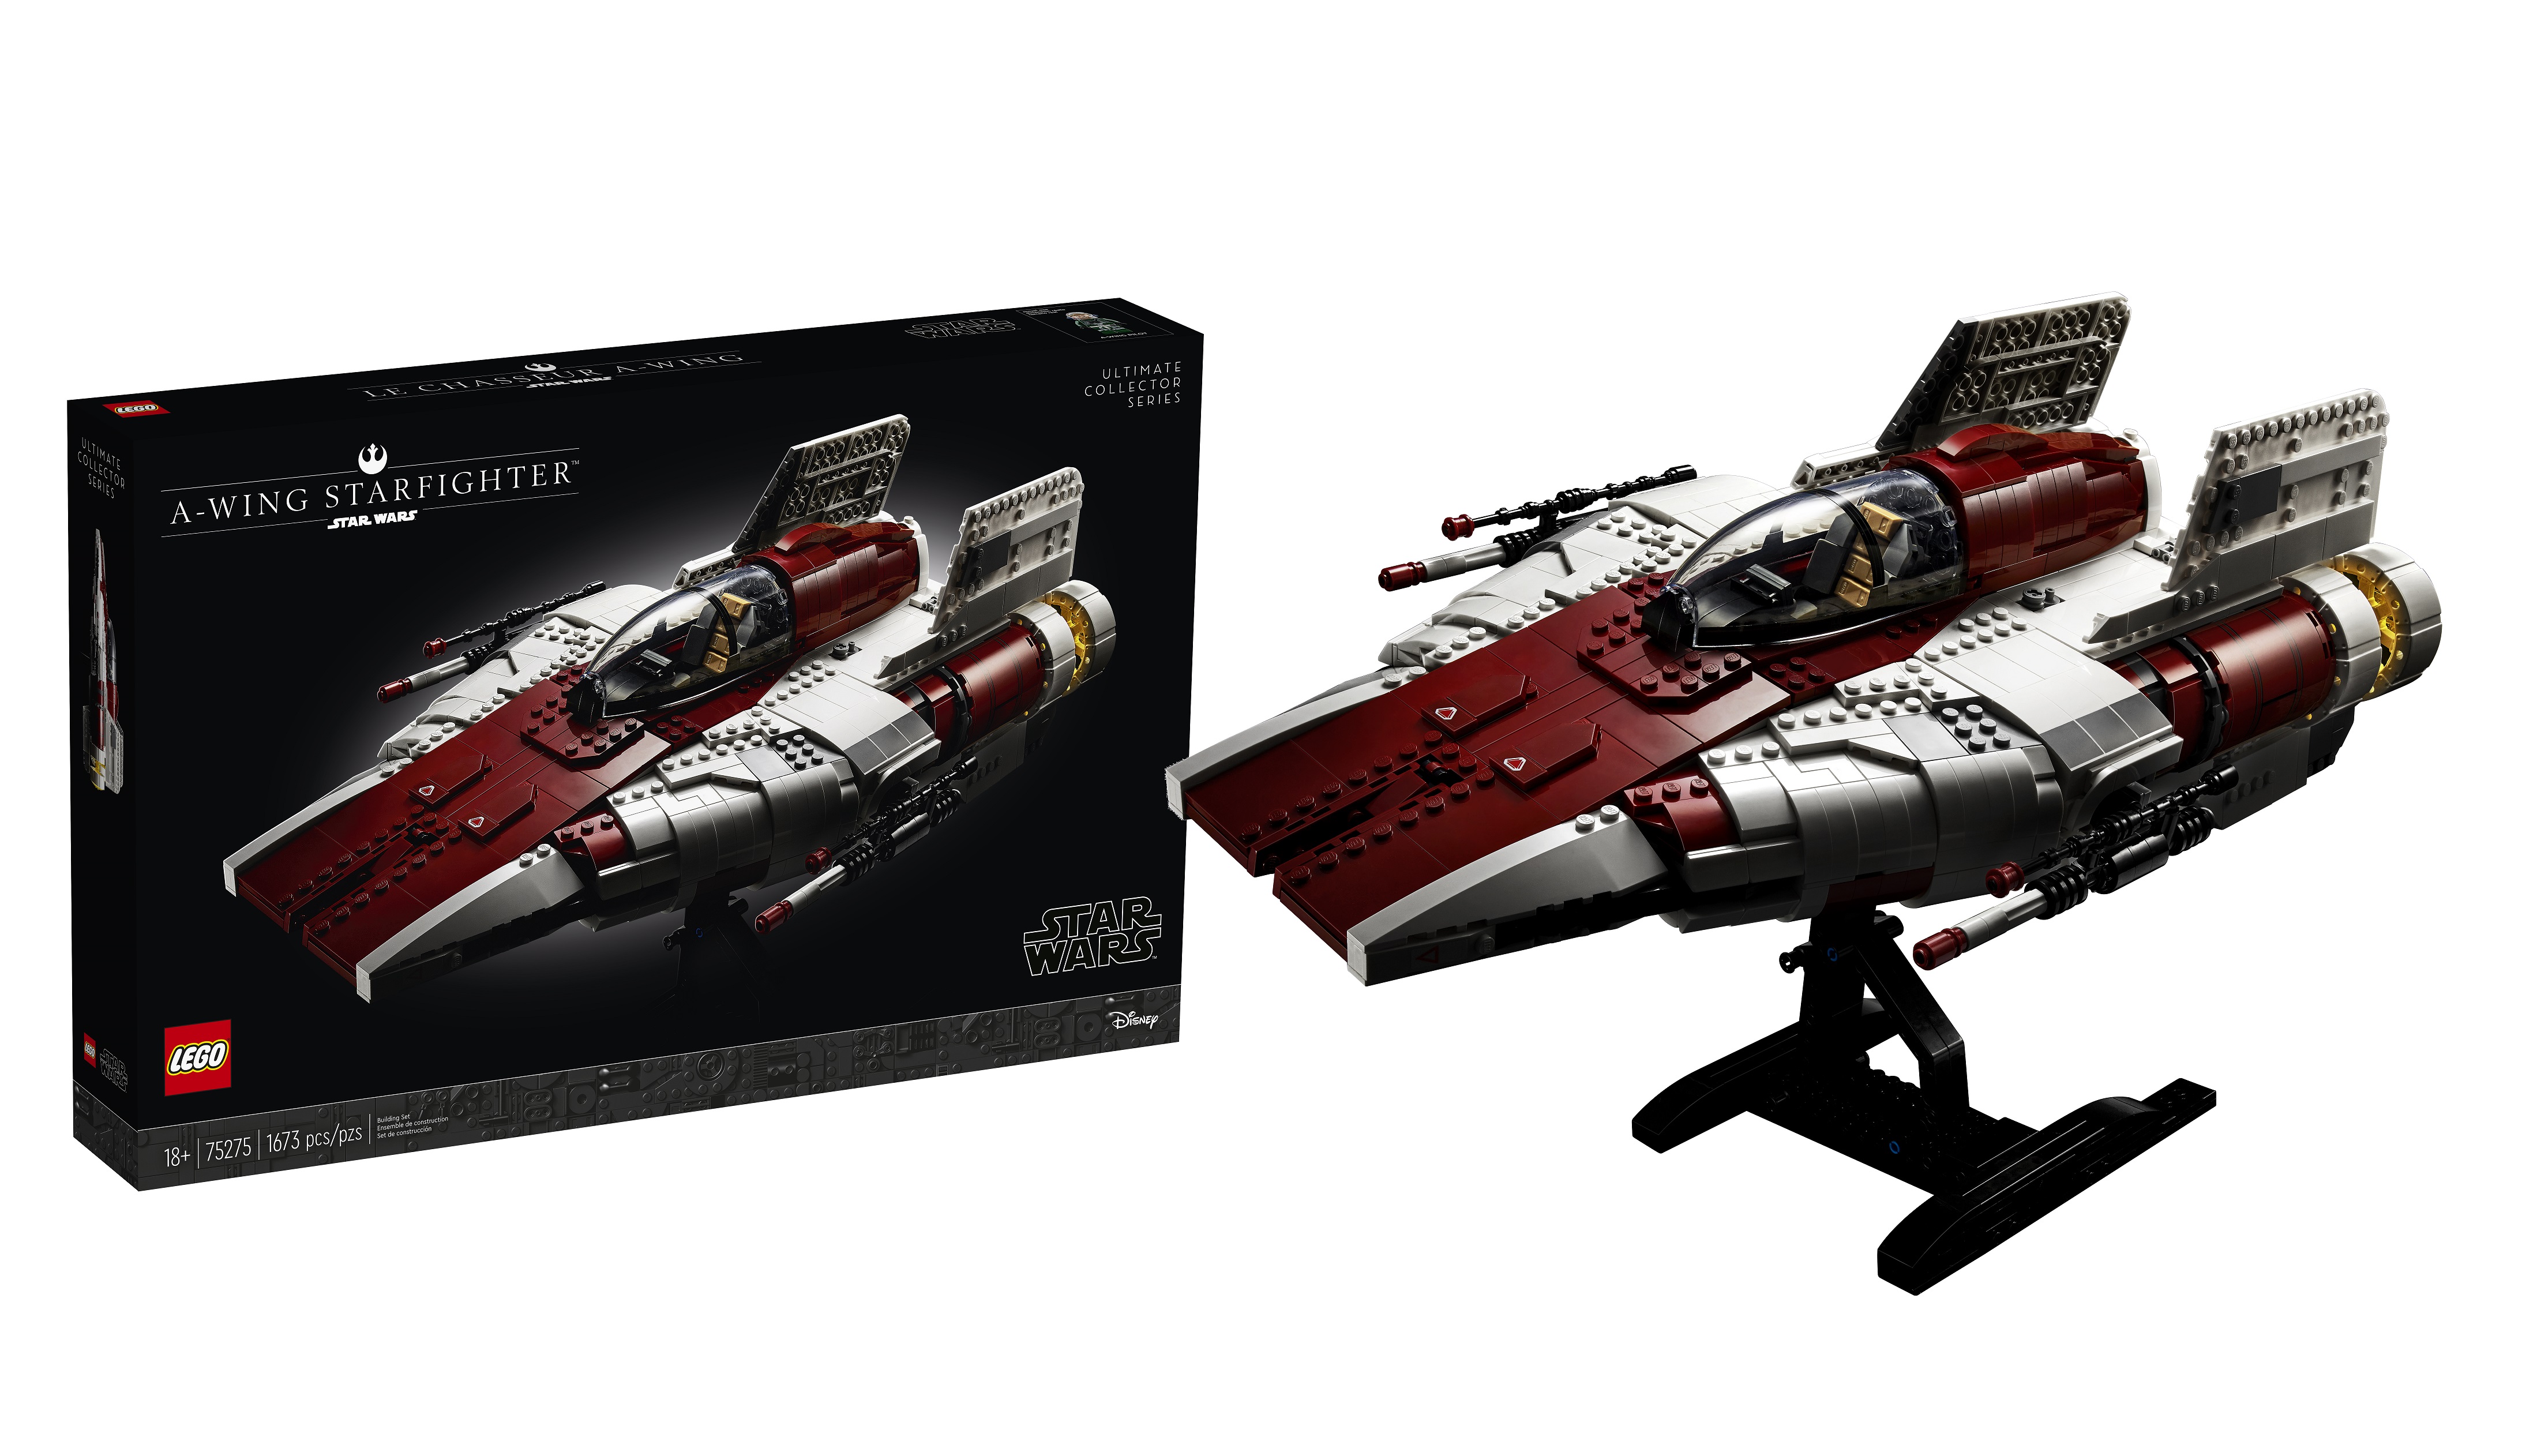 reform slave websted LEGO 75275 UCS A-Wing Starfighter speeds into the LEGO Star Wars universe -  Jay's Brick Blog